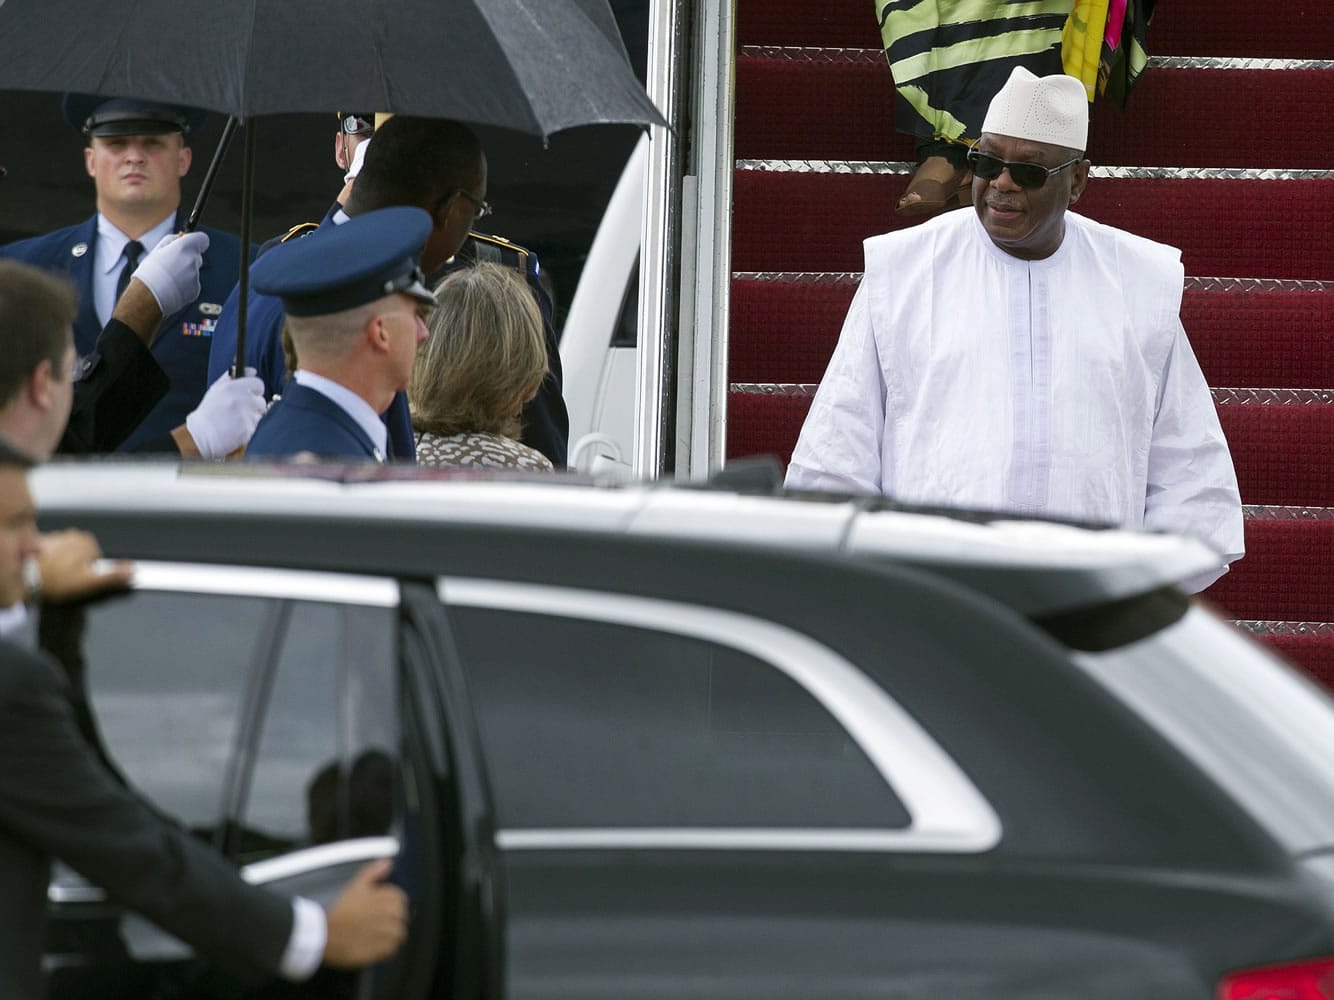 Mali President Ibrahim Boubacar Keita, right, arrives Sunday at Andrews Air Force Base, Md., to attend the U.S.-Africa Leaders Summit.